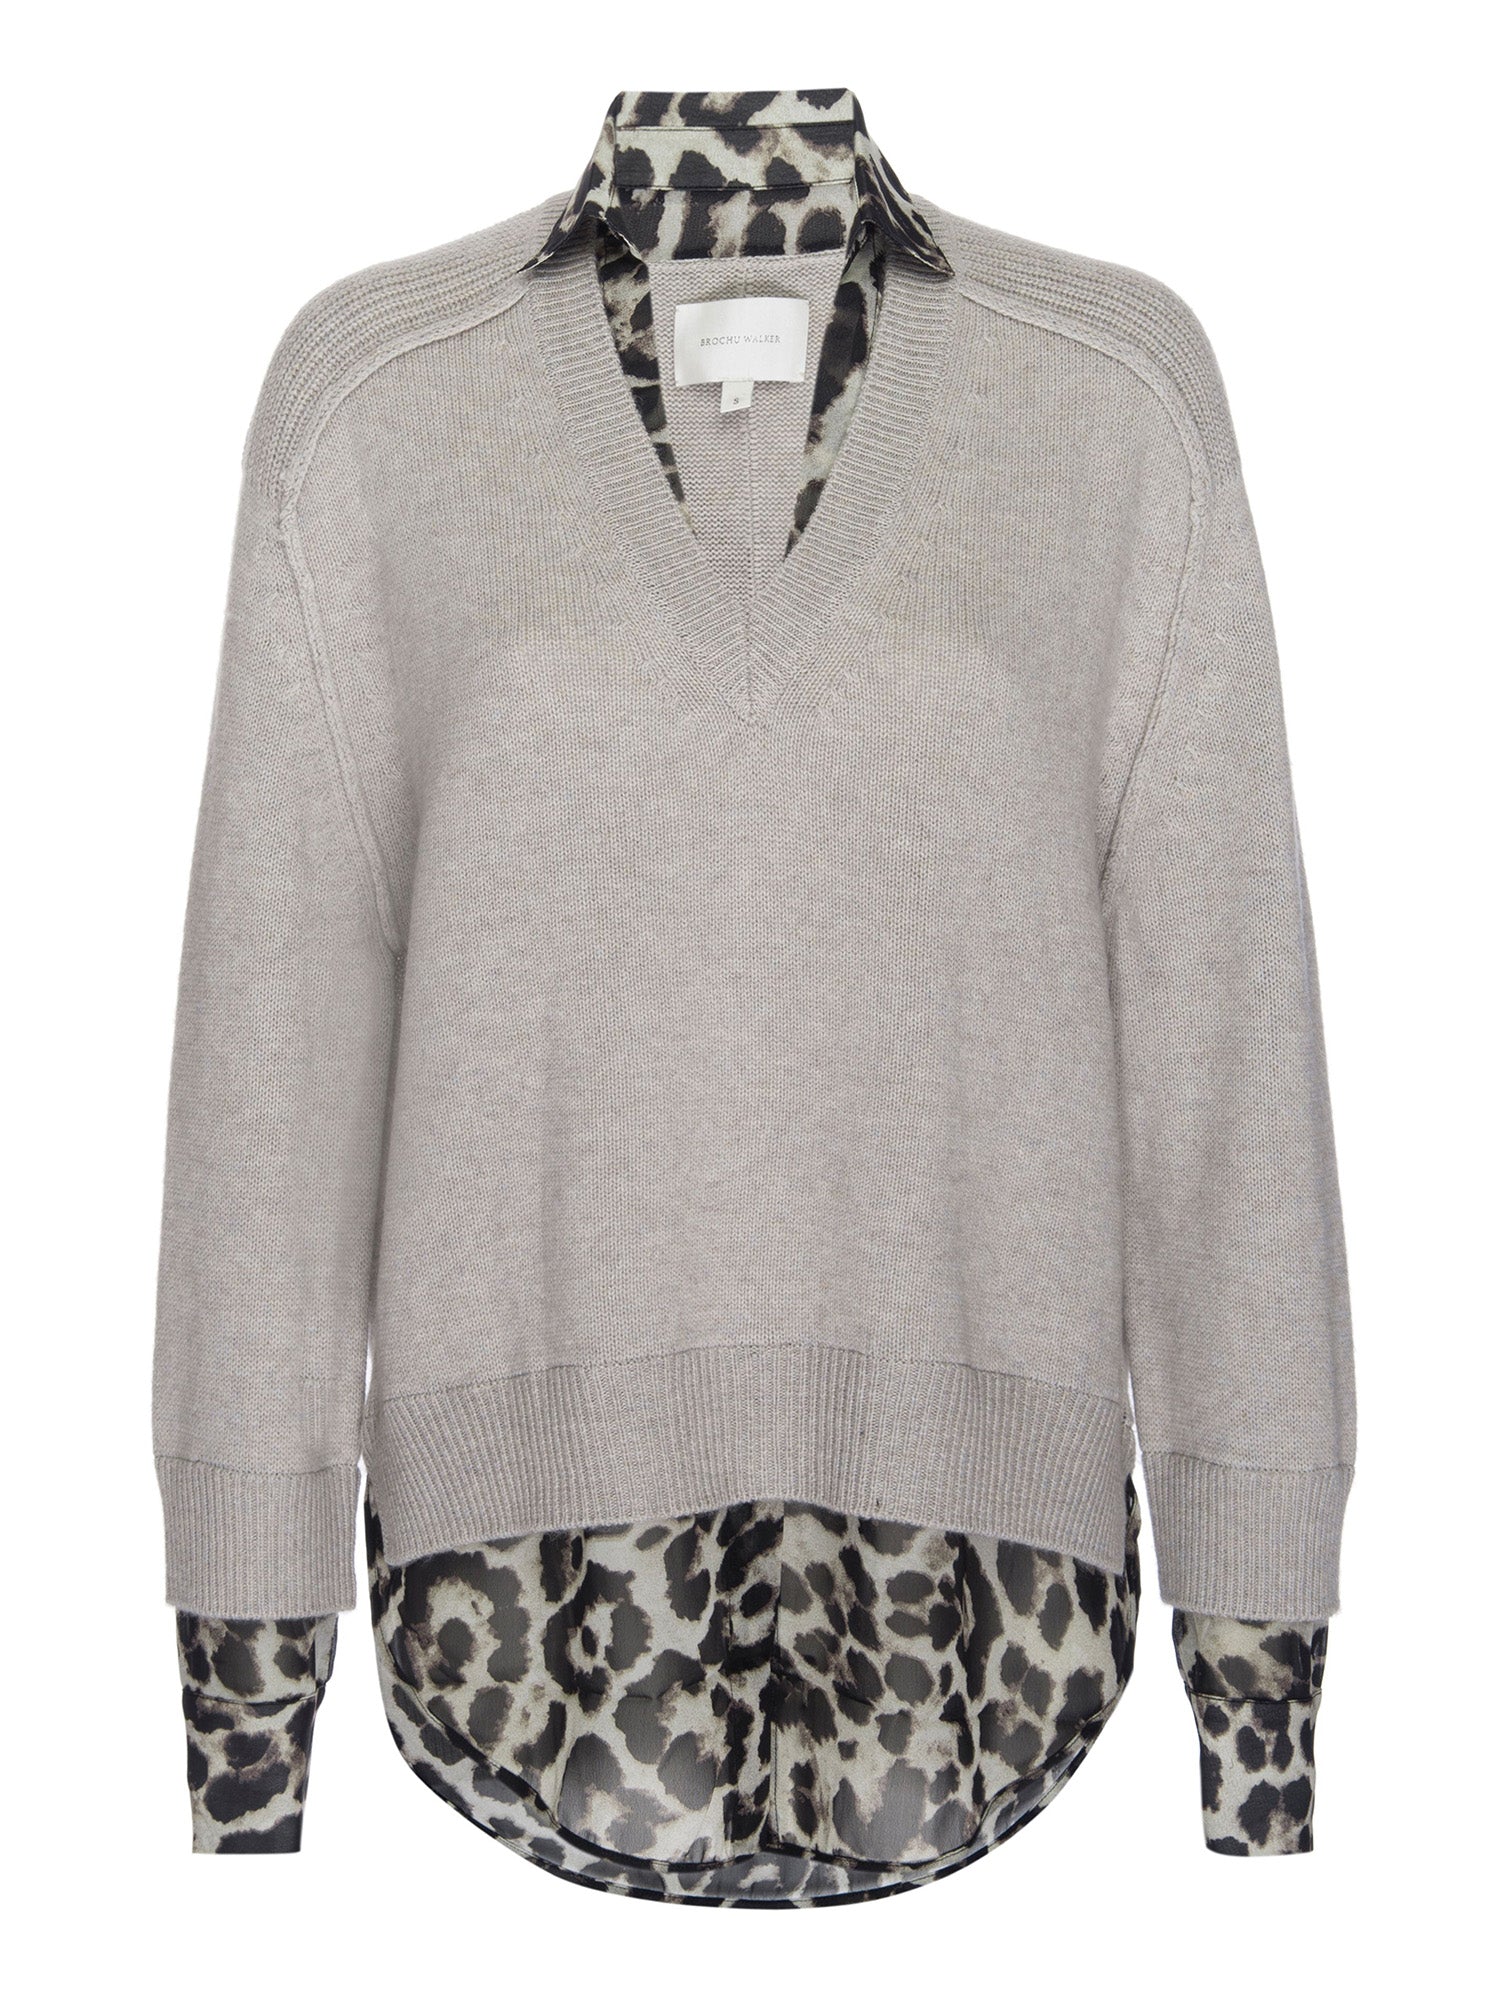 Brochu Walker | Women's V-neck Printed Layered Pullover Sweater in Light  Chia Leopard Printed Combo